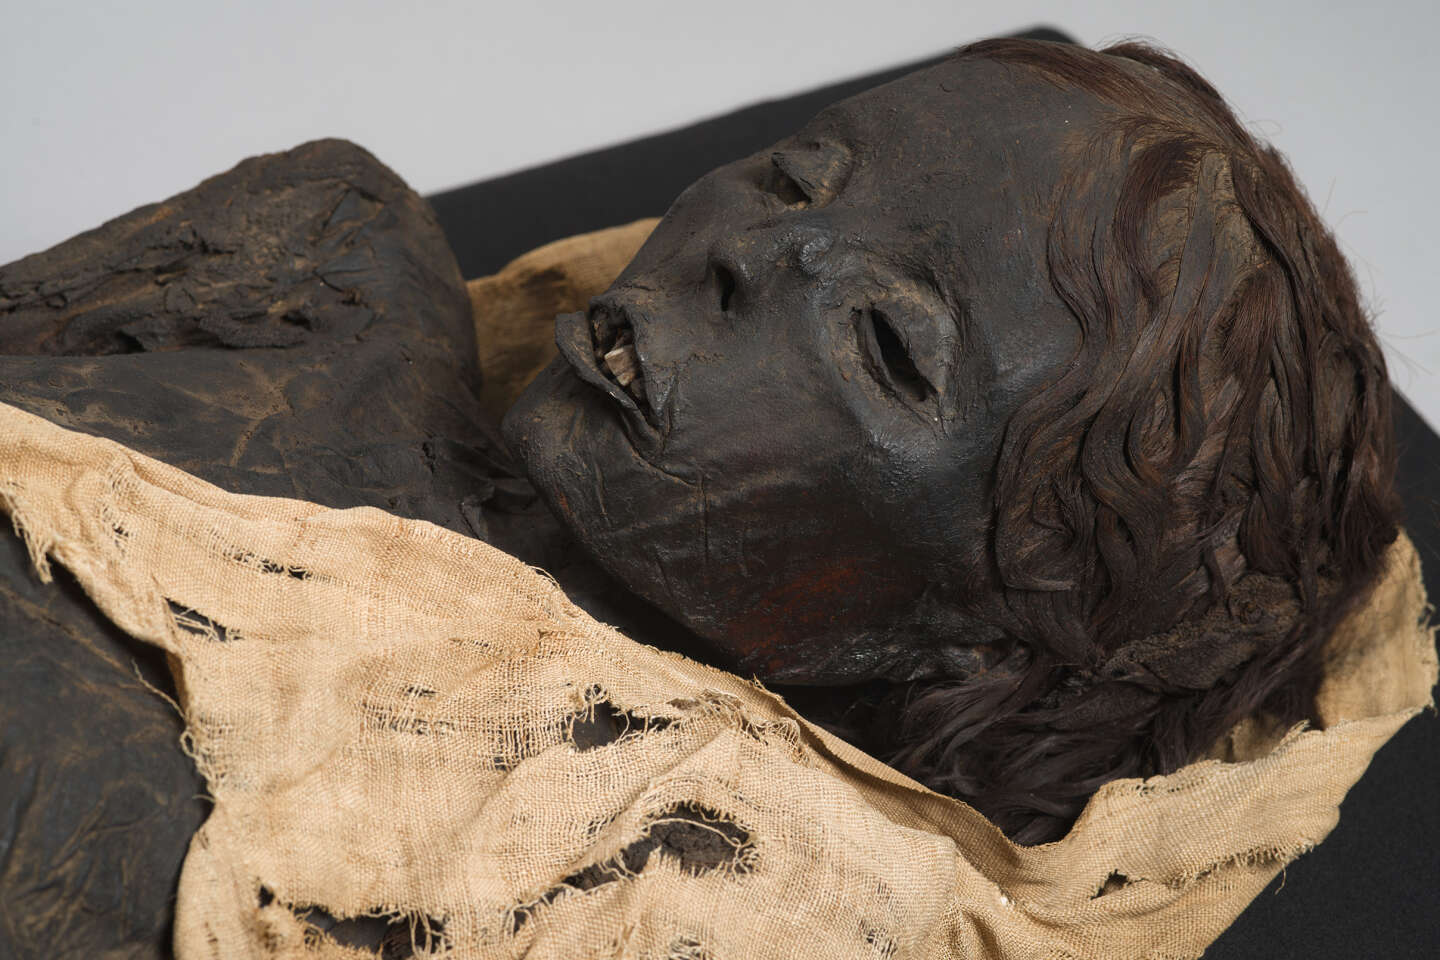 At the Museum of Toulouse, science writes the novel The Mummy